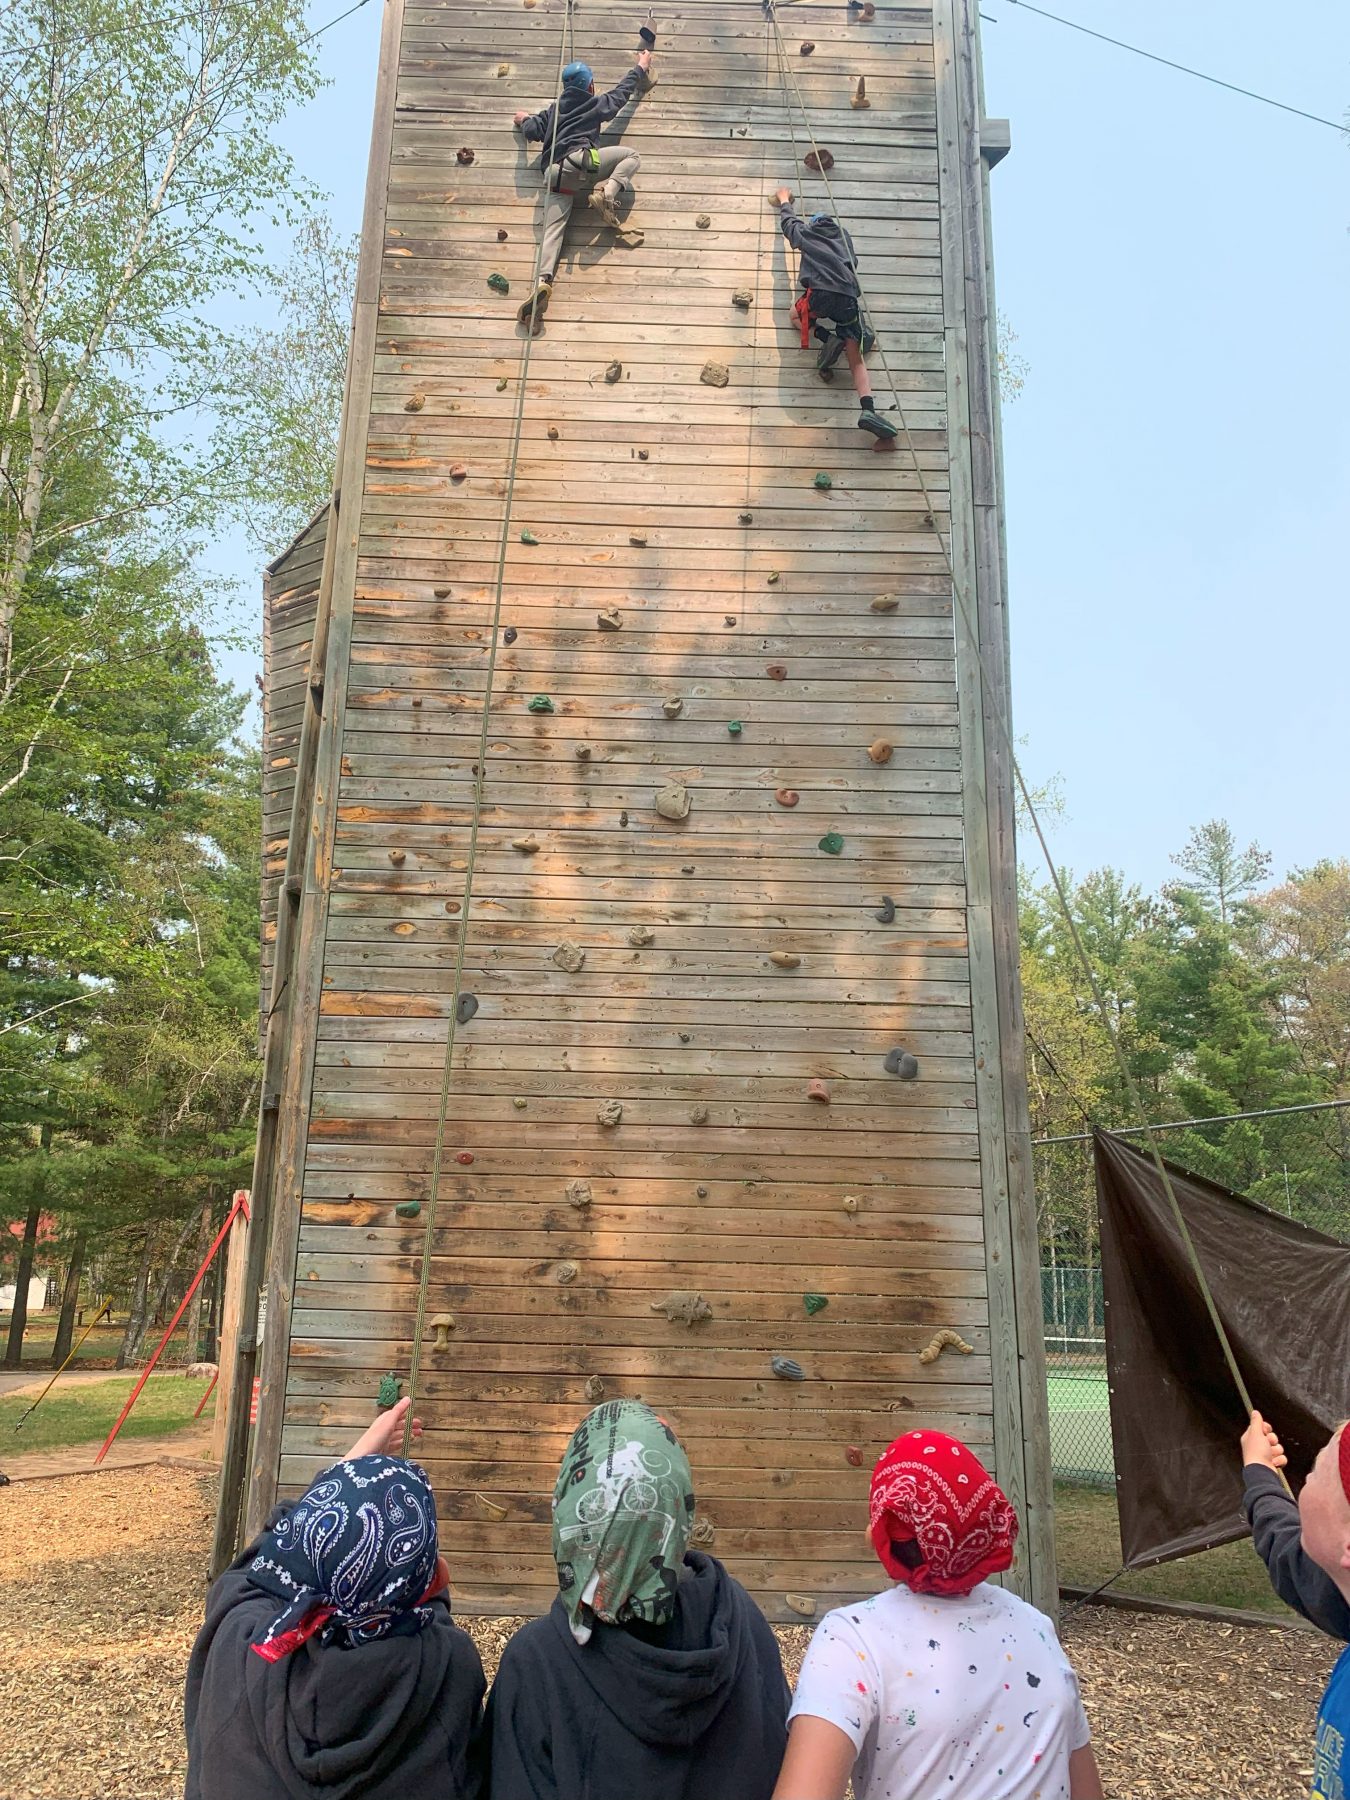 3 campers face away from the camera looking at a climbing wall with two climbers climbing up to the top 